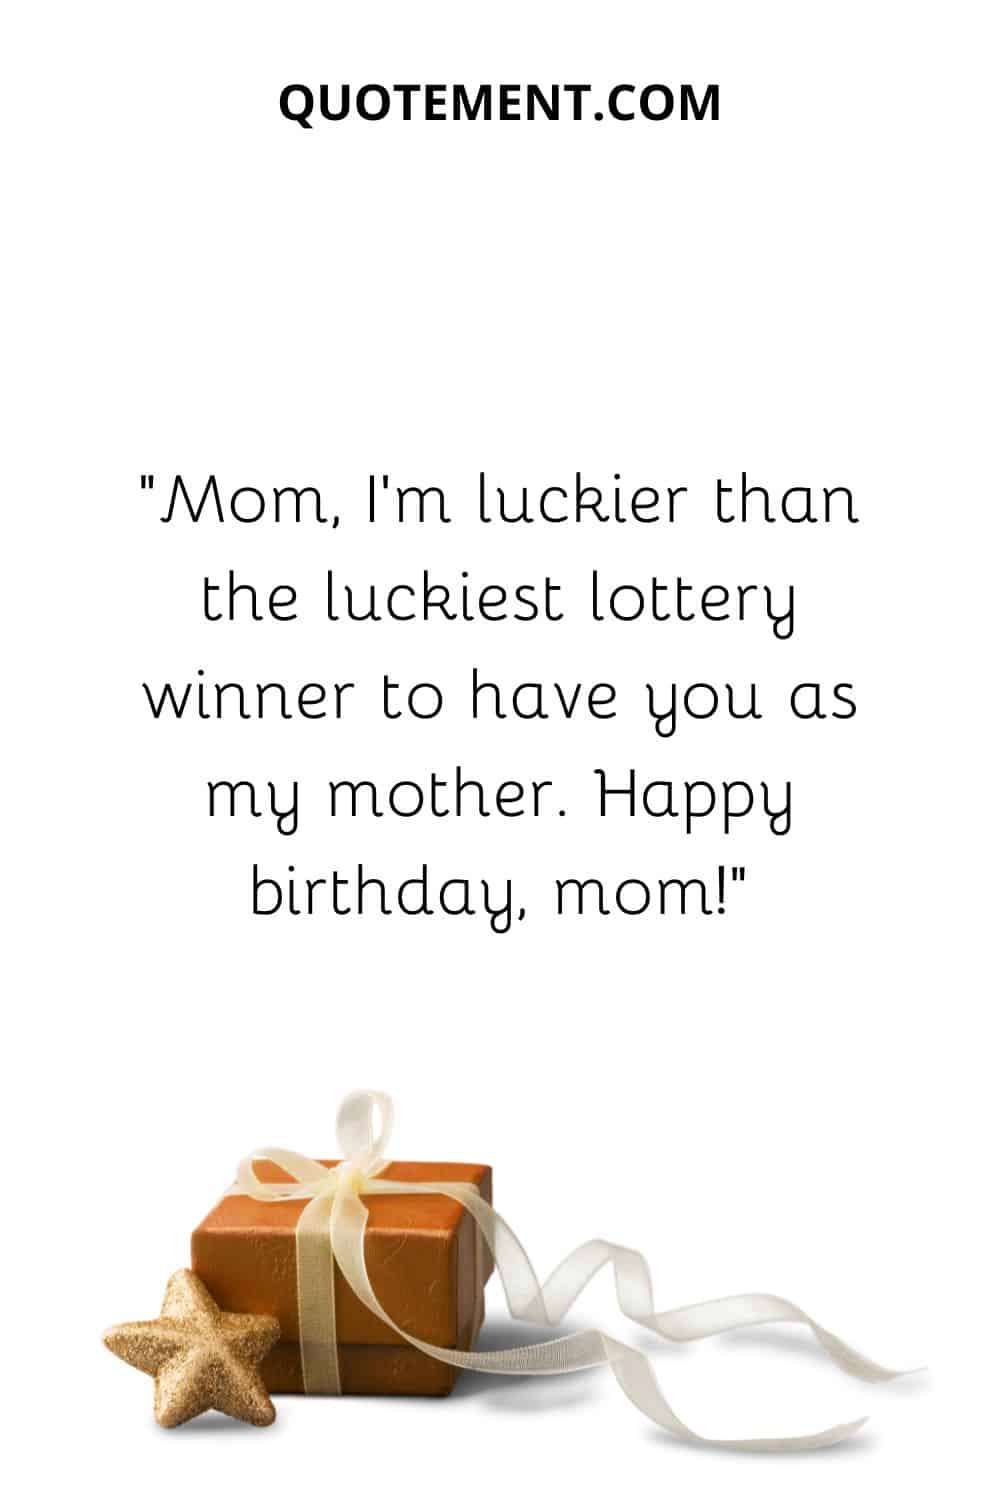 Mom, I’m luckier than the luckiest lottery winner to have you as my mother